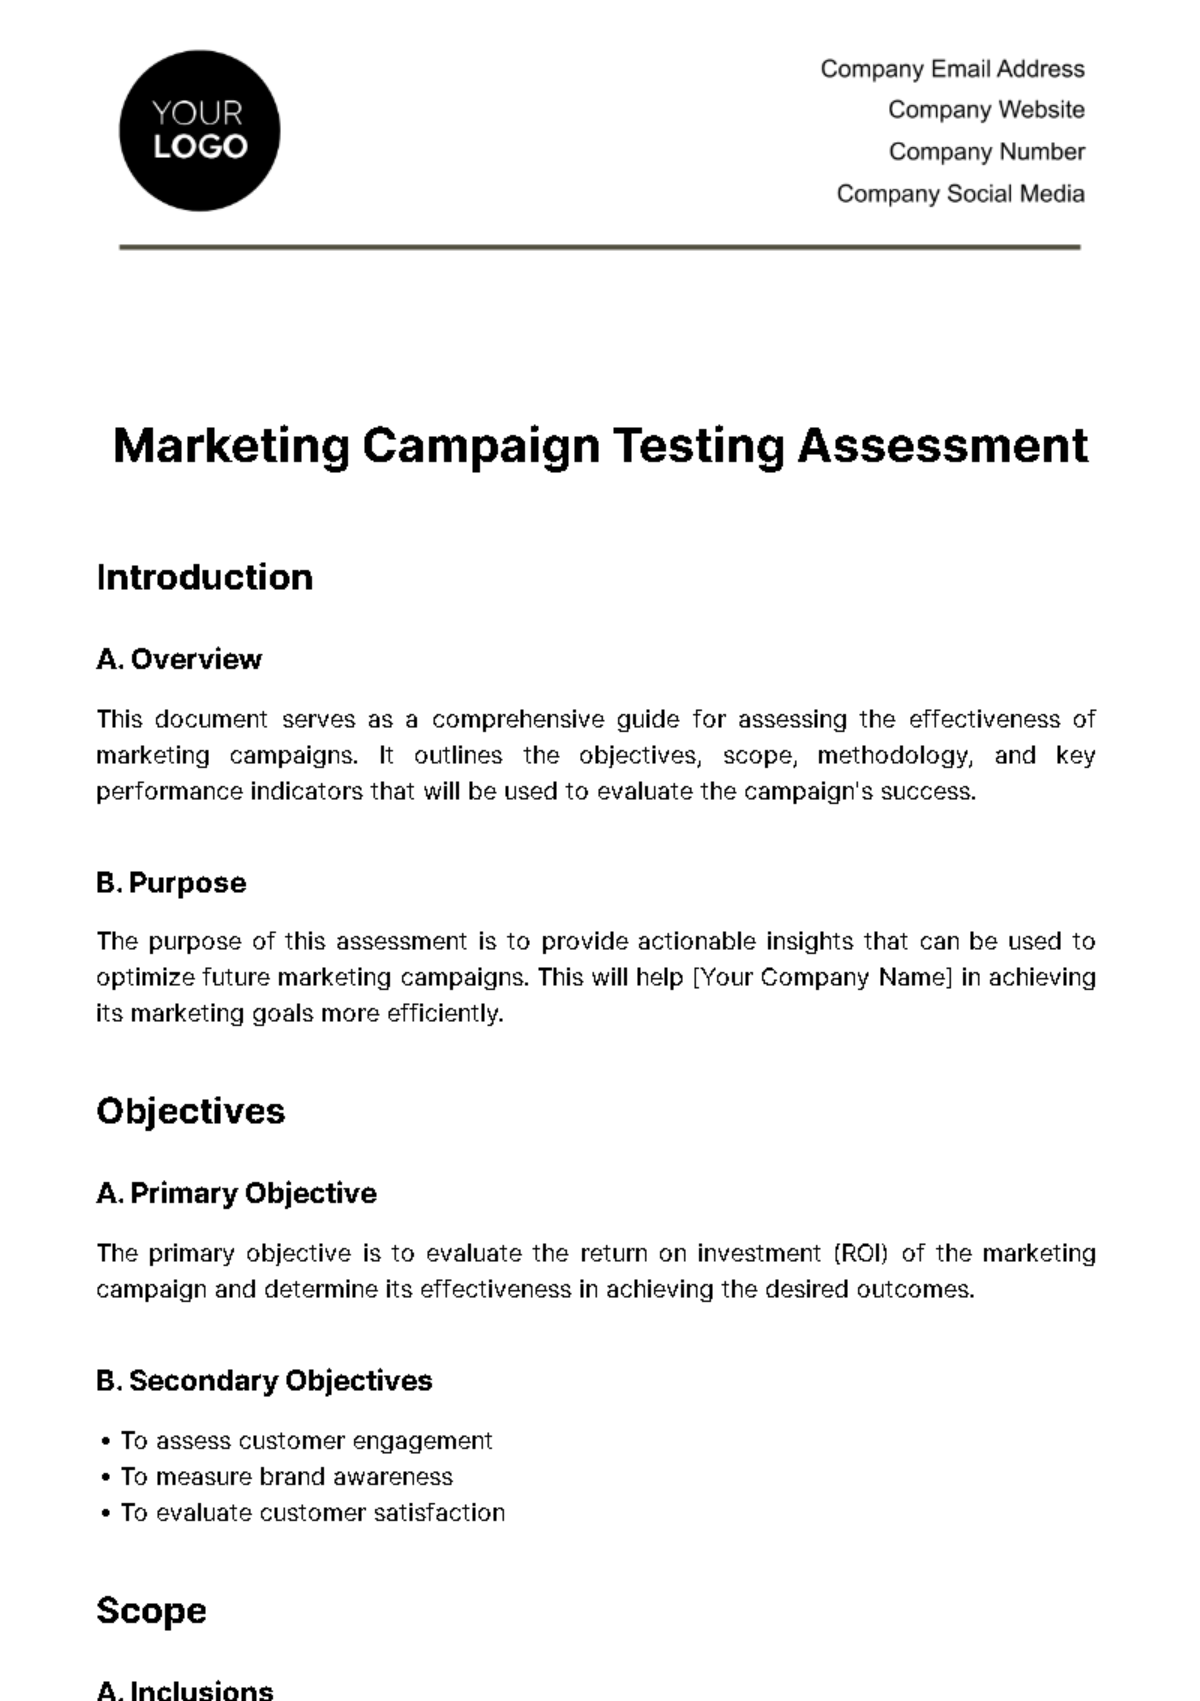 Marketing Campaign Testing Assessment Template